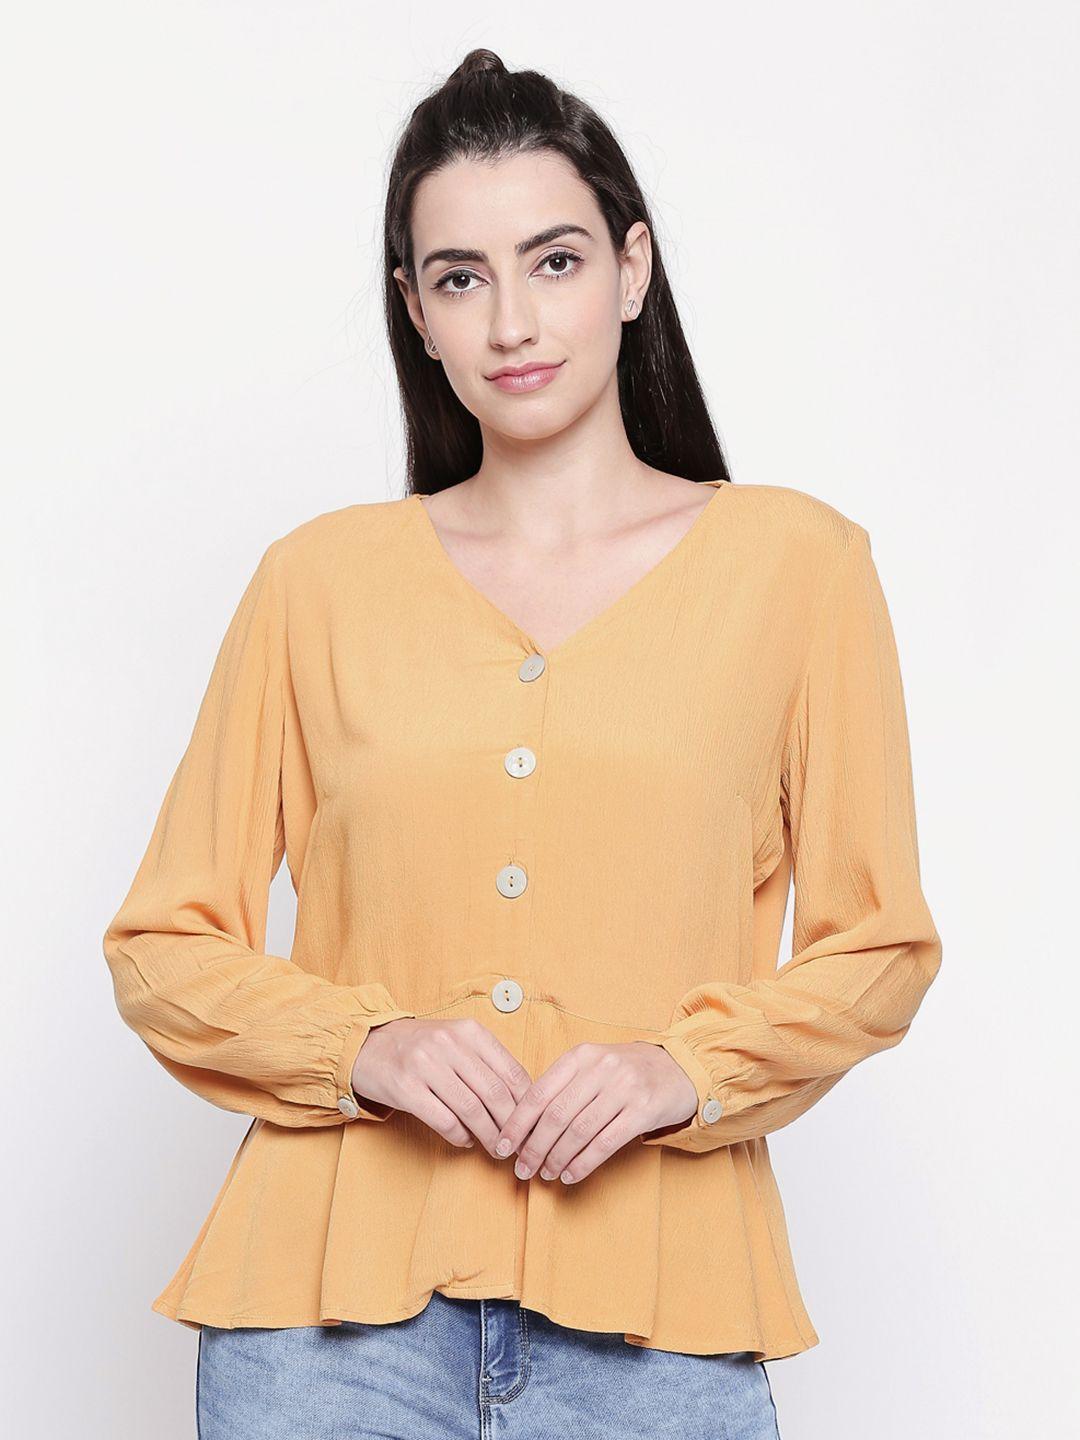 honey by pantaloons women mustard yellow solid top